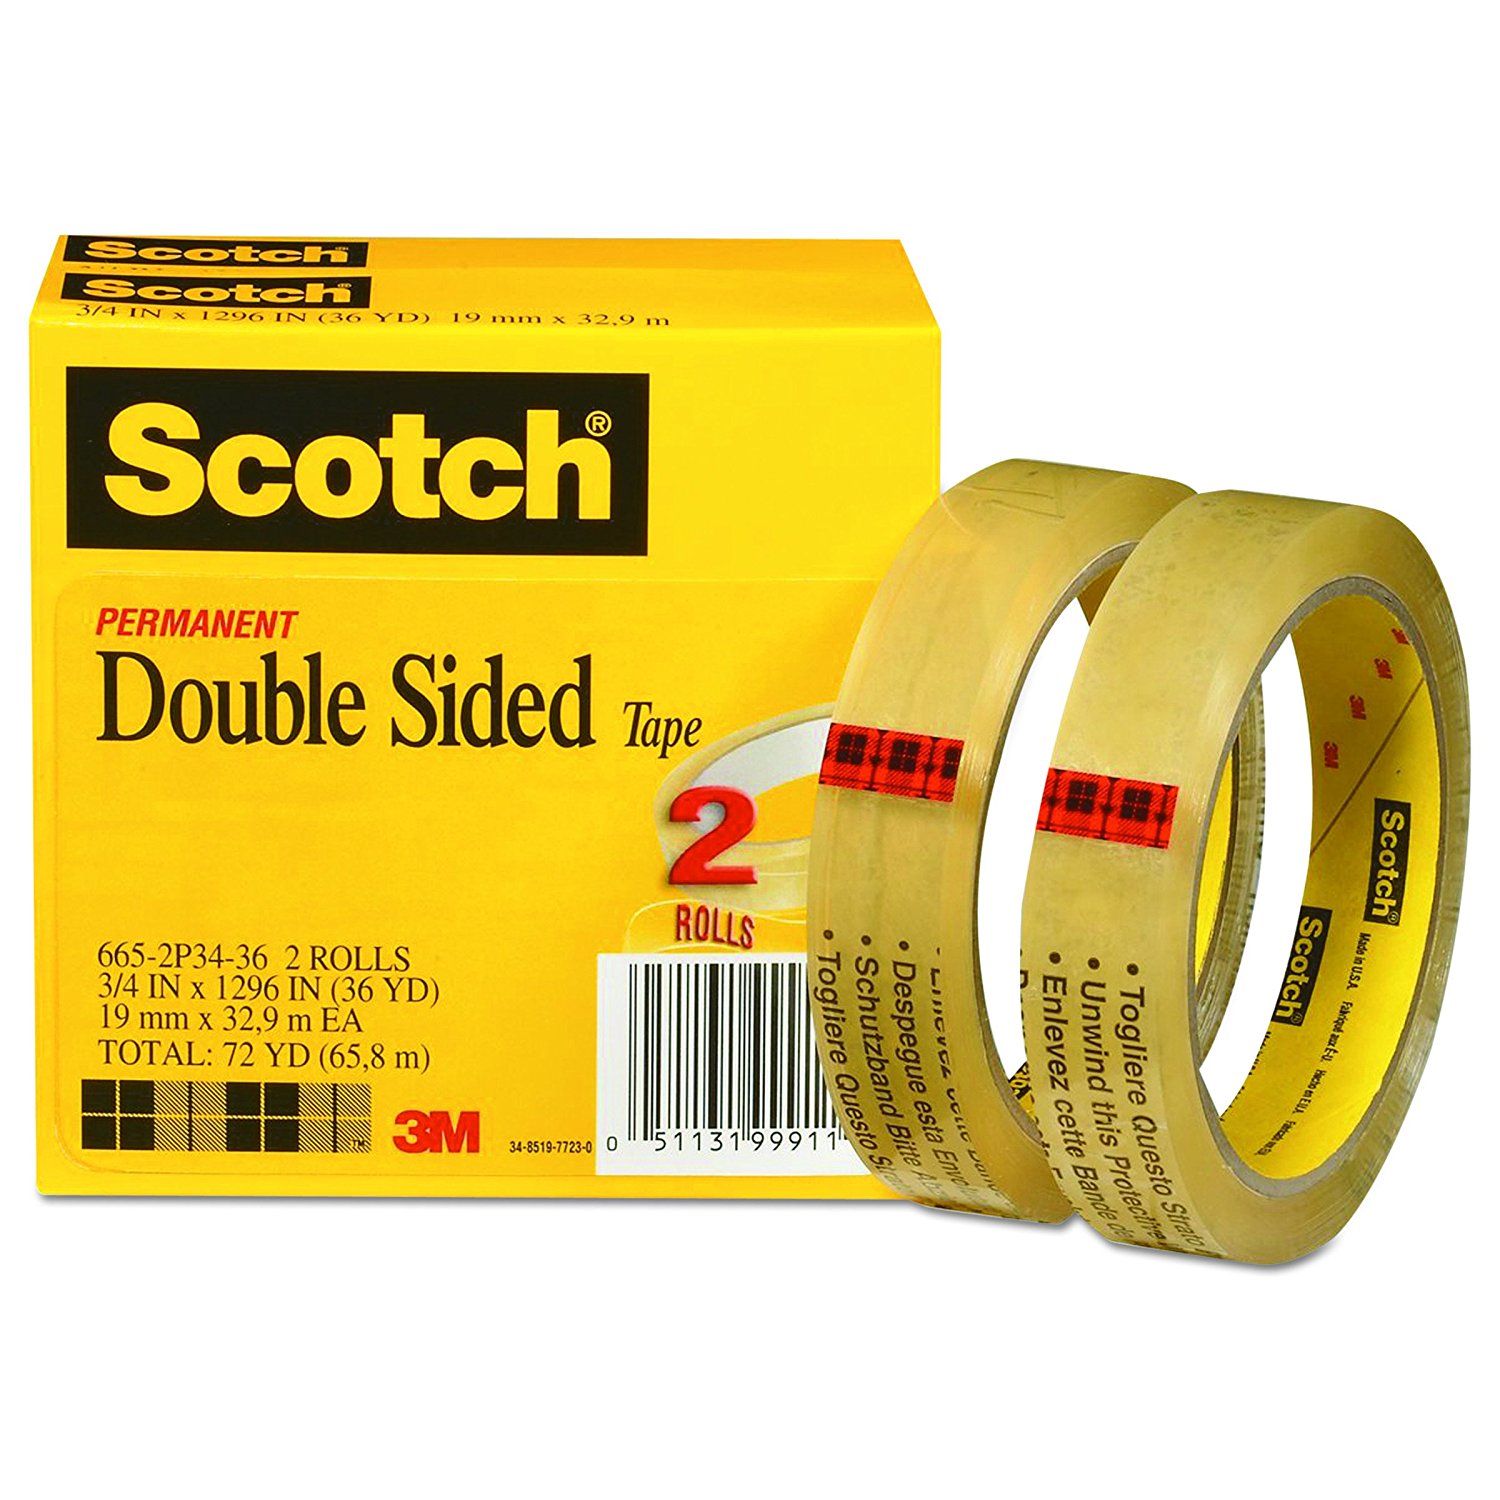 3M™ Removable Repositionable Double Coated Tape 9425